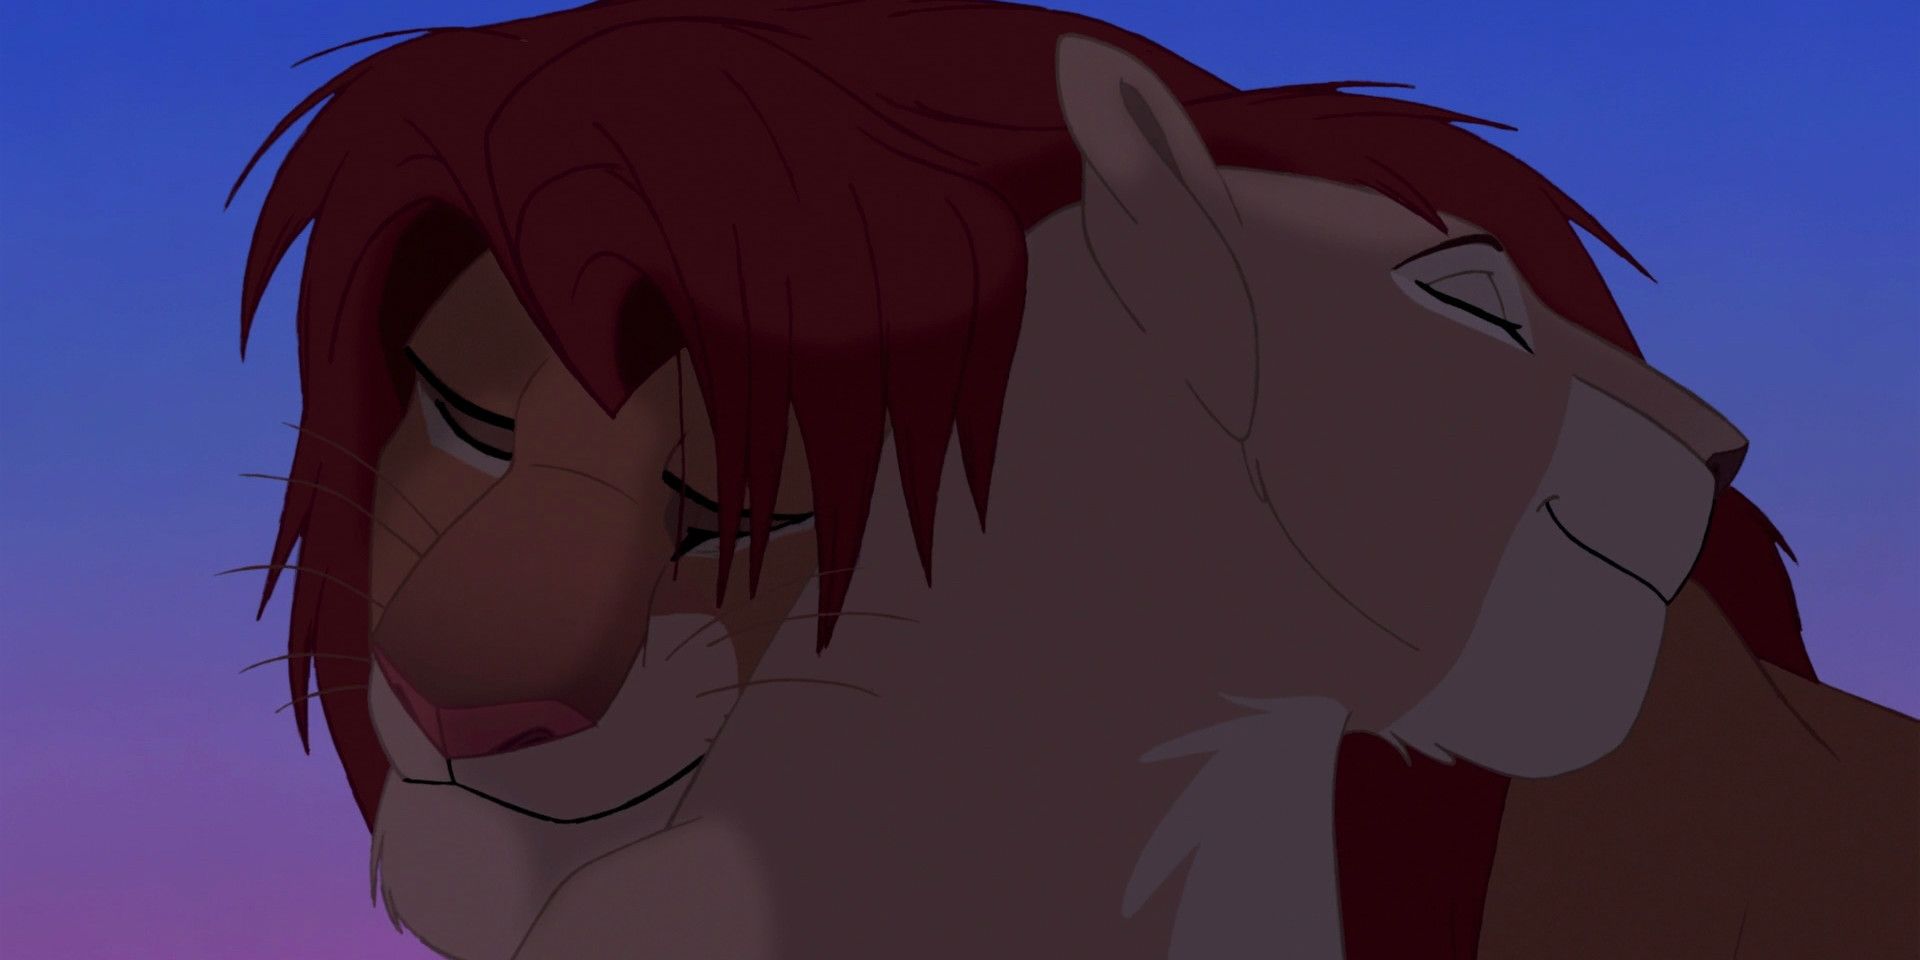 Simba and Nala embrace during The Lion King's &quot;Can You Feel the Love Tonight&quot;